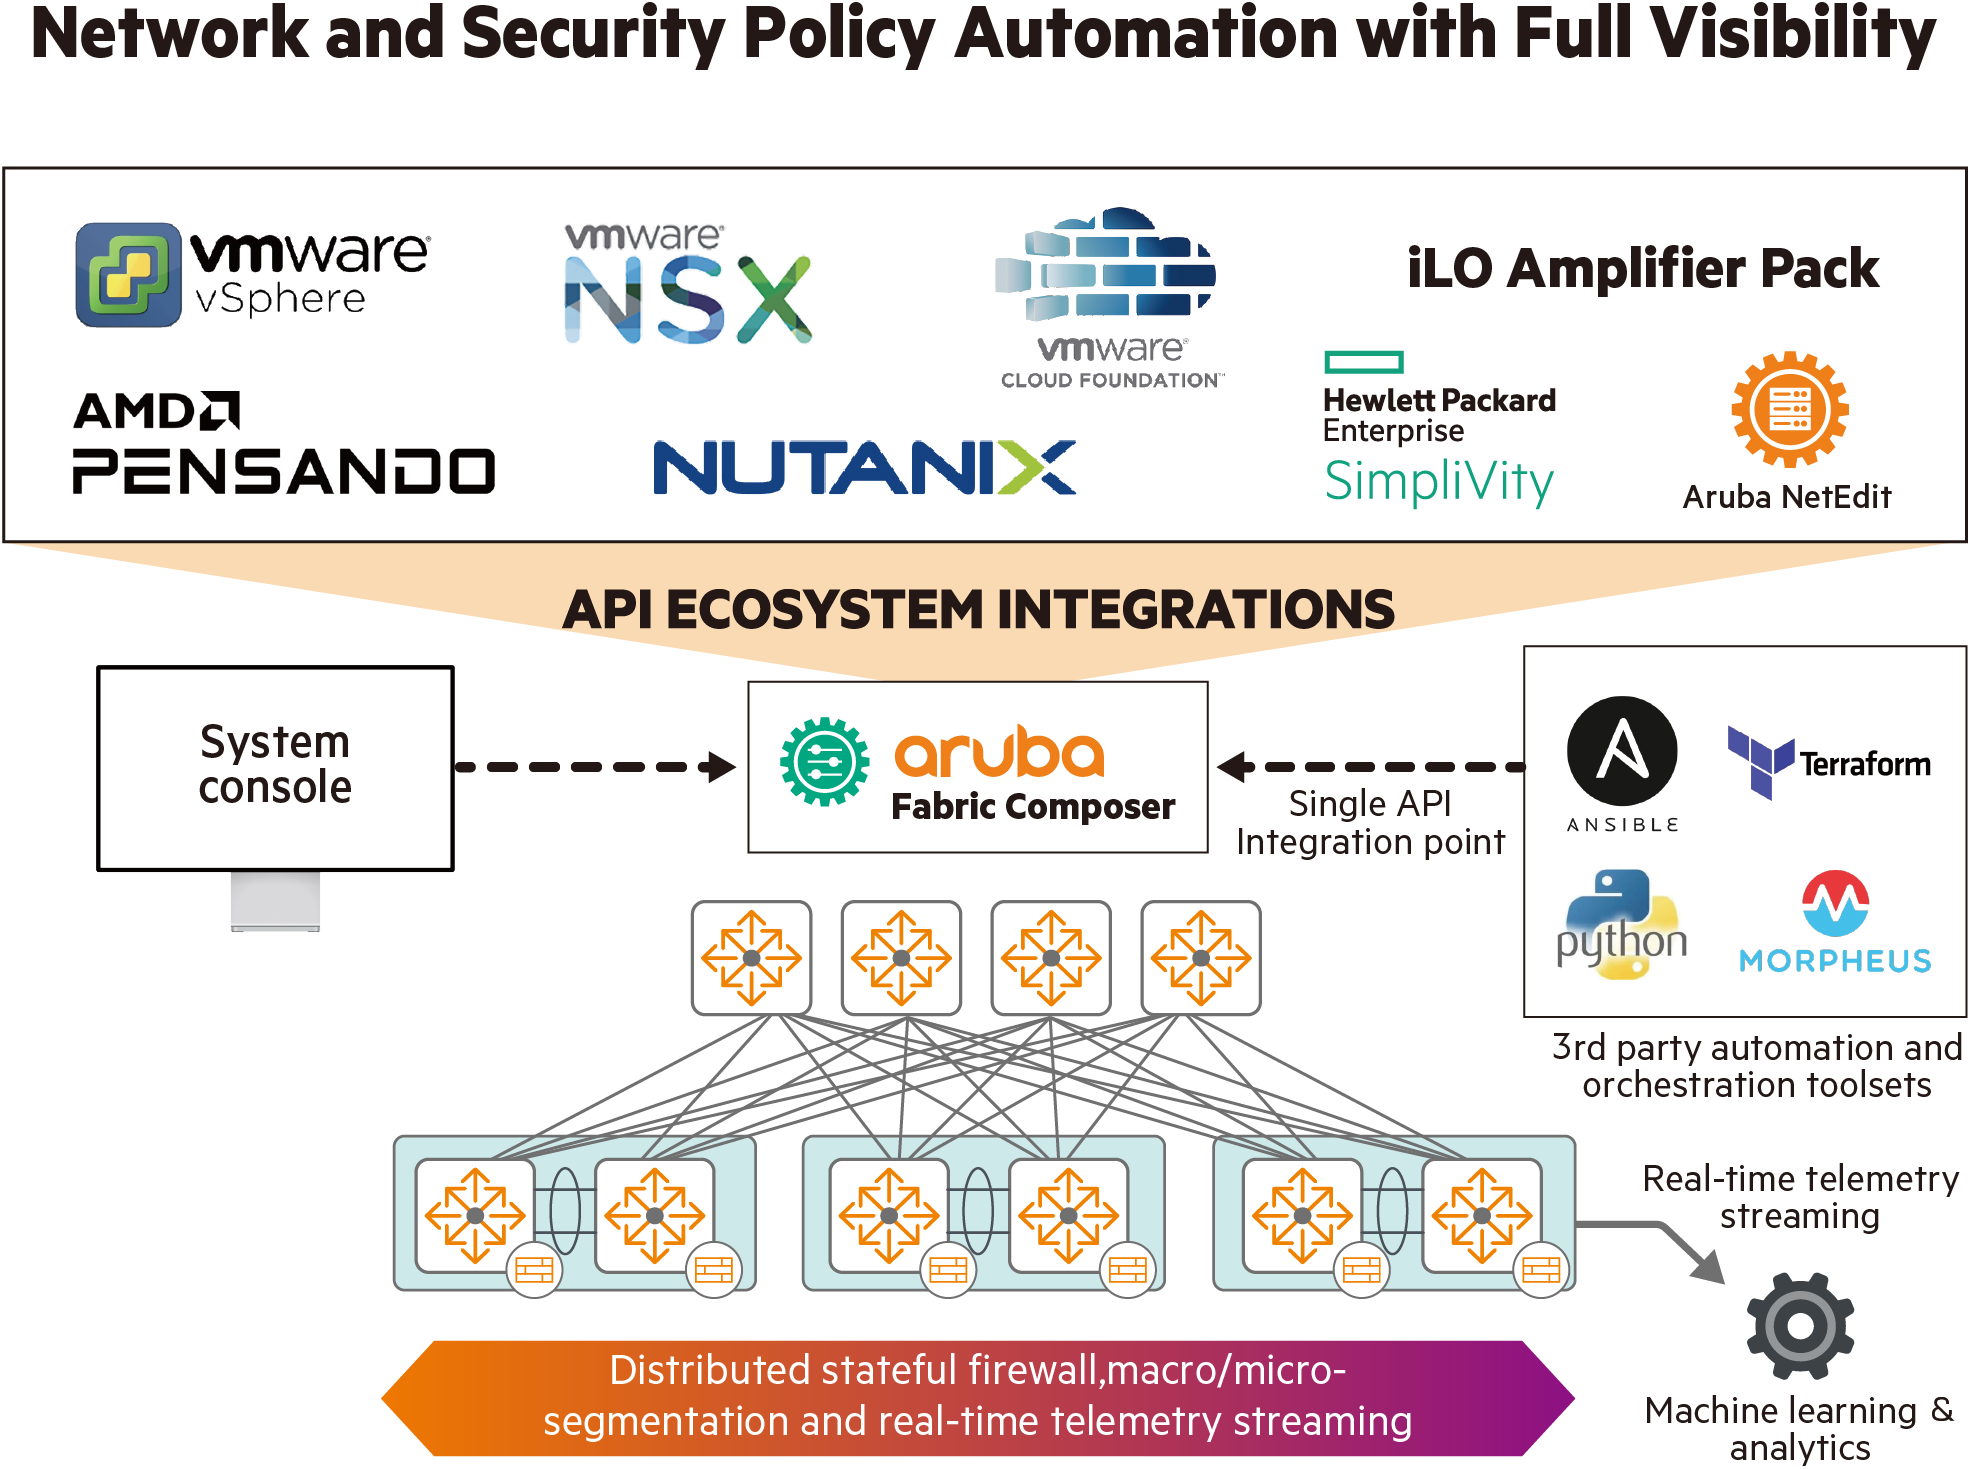 Network and Security Policy Automation with Full Visibility